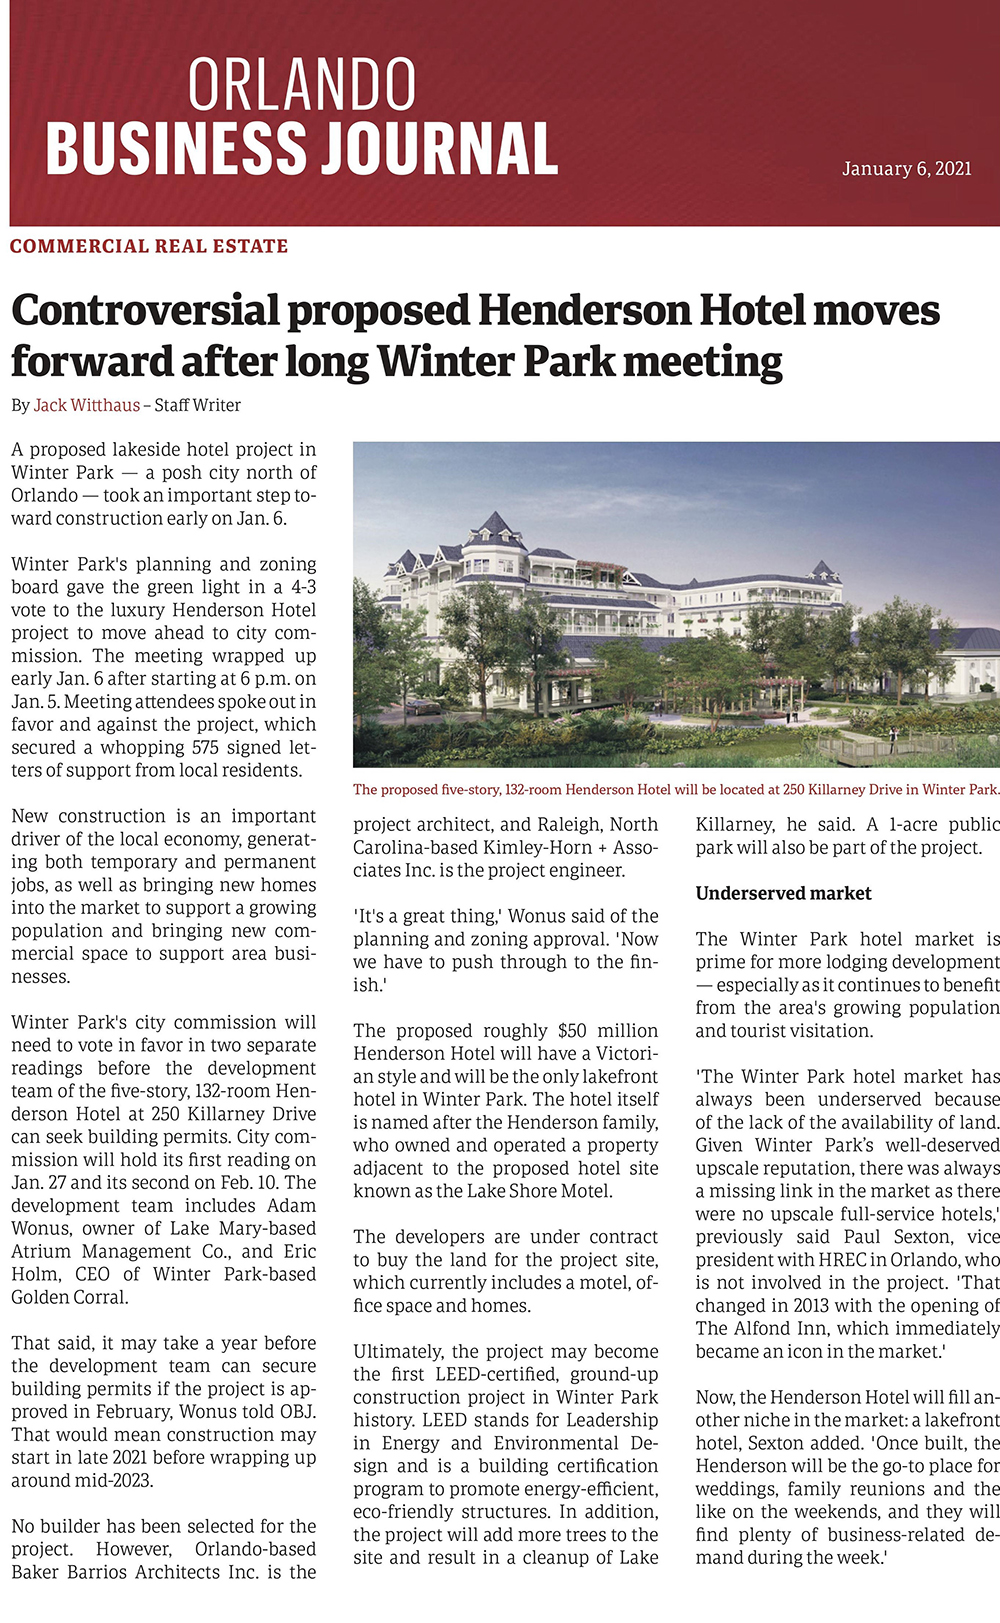 Controversial proposed Henderson Hotel moves forward after long Winter Park meeting